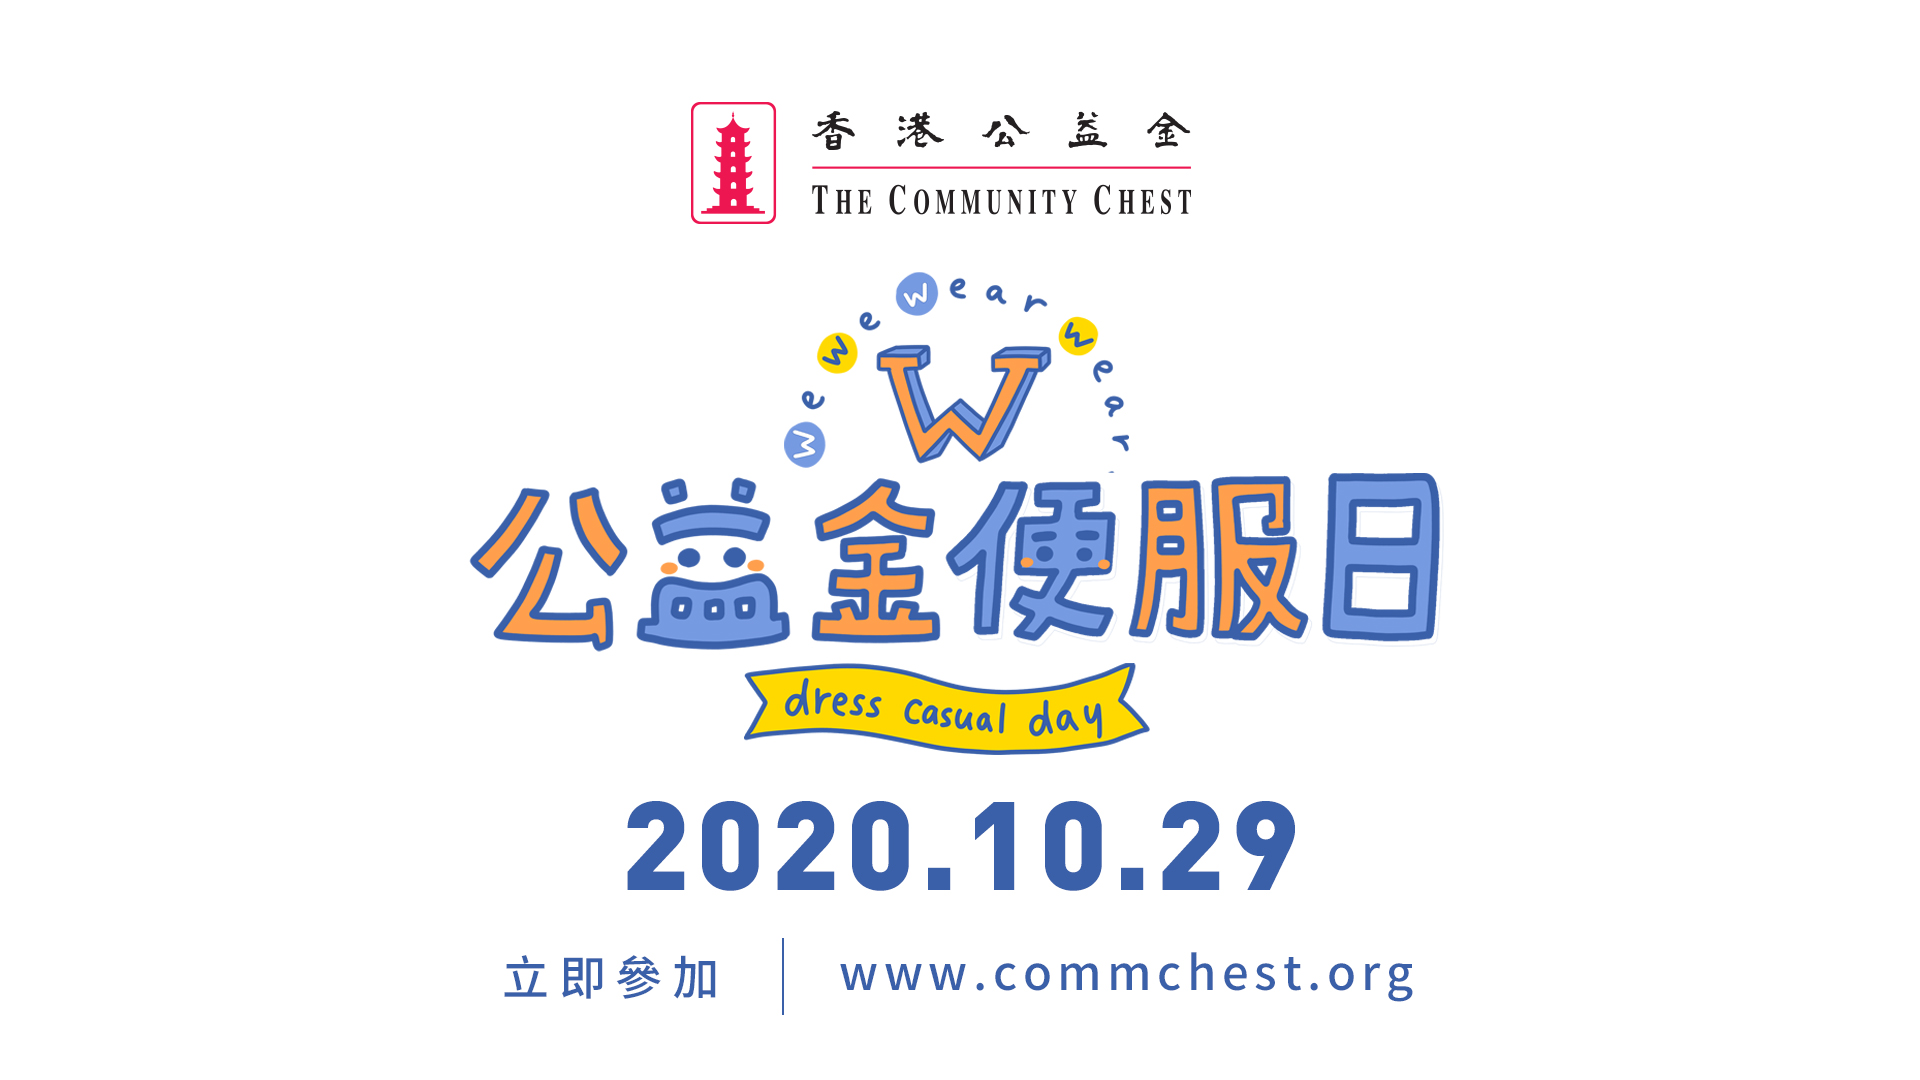 The 2020 Community Chest Dress Casual Day